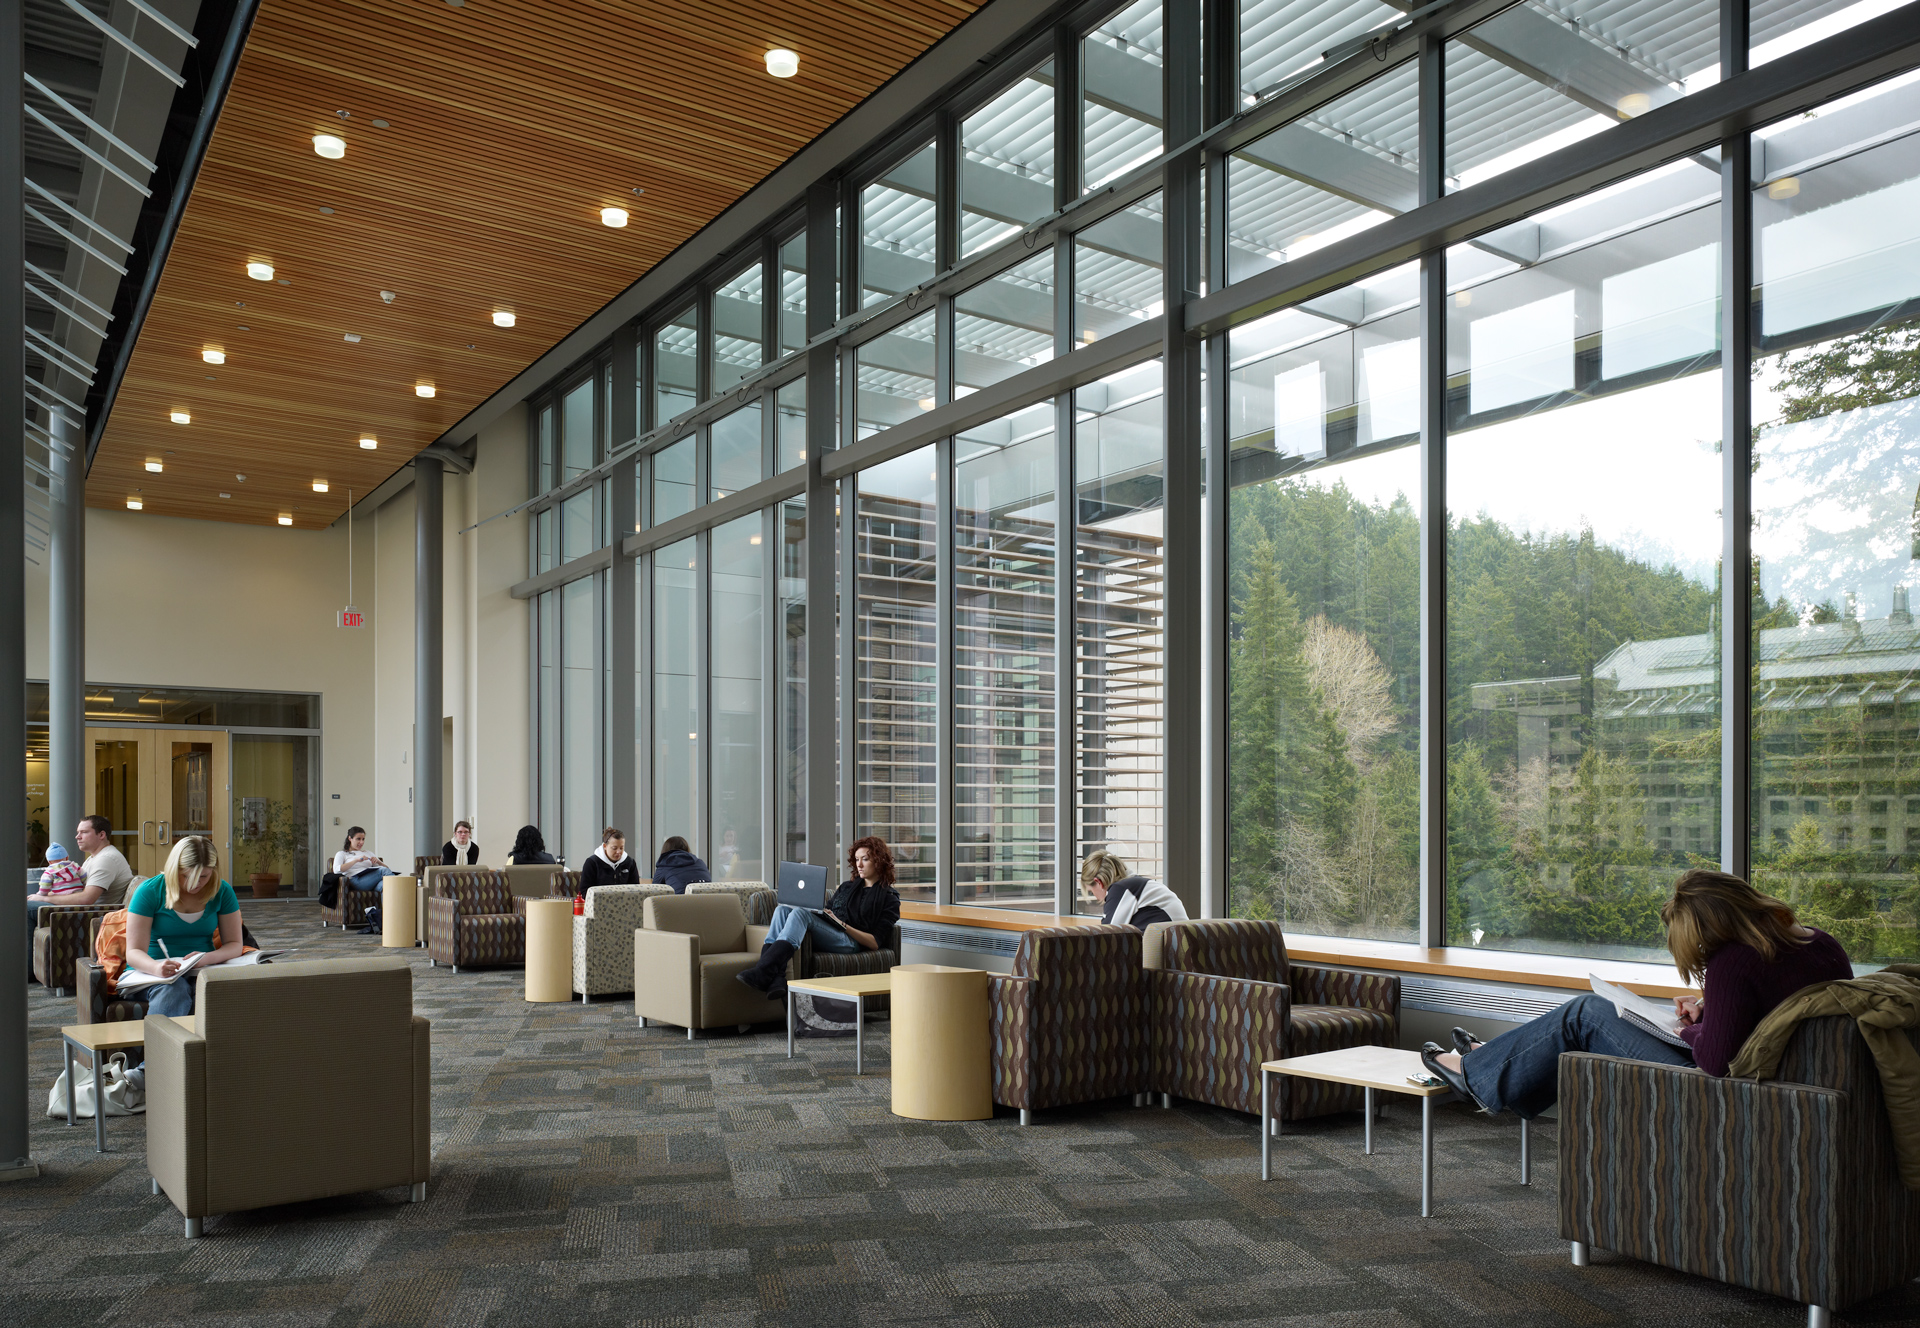 WWU Multicultural Center - Opsis Architecture